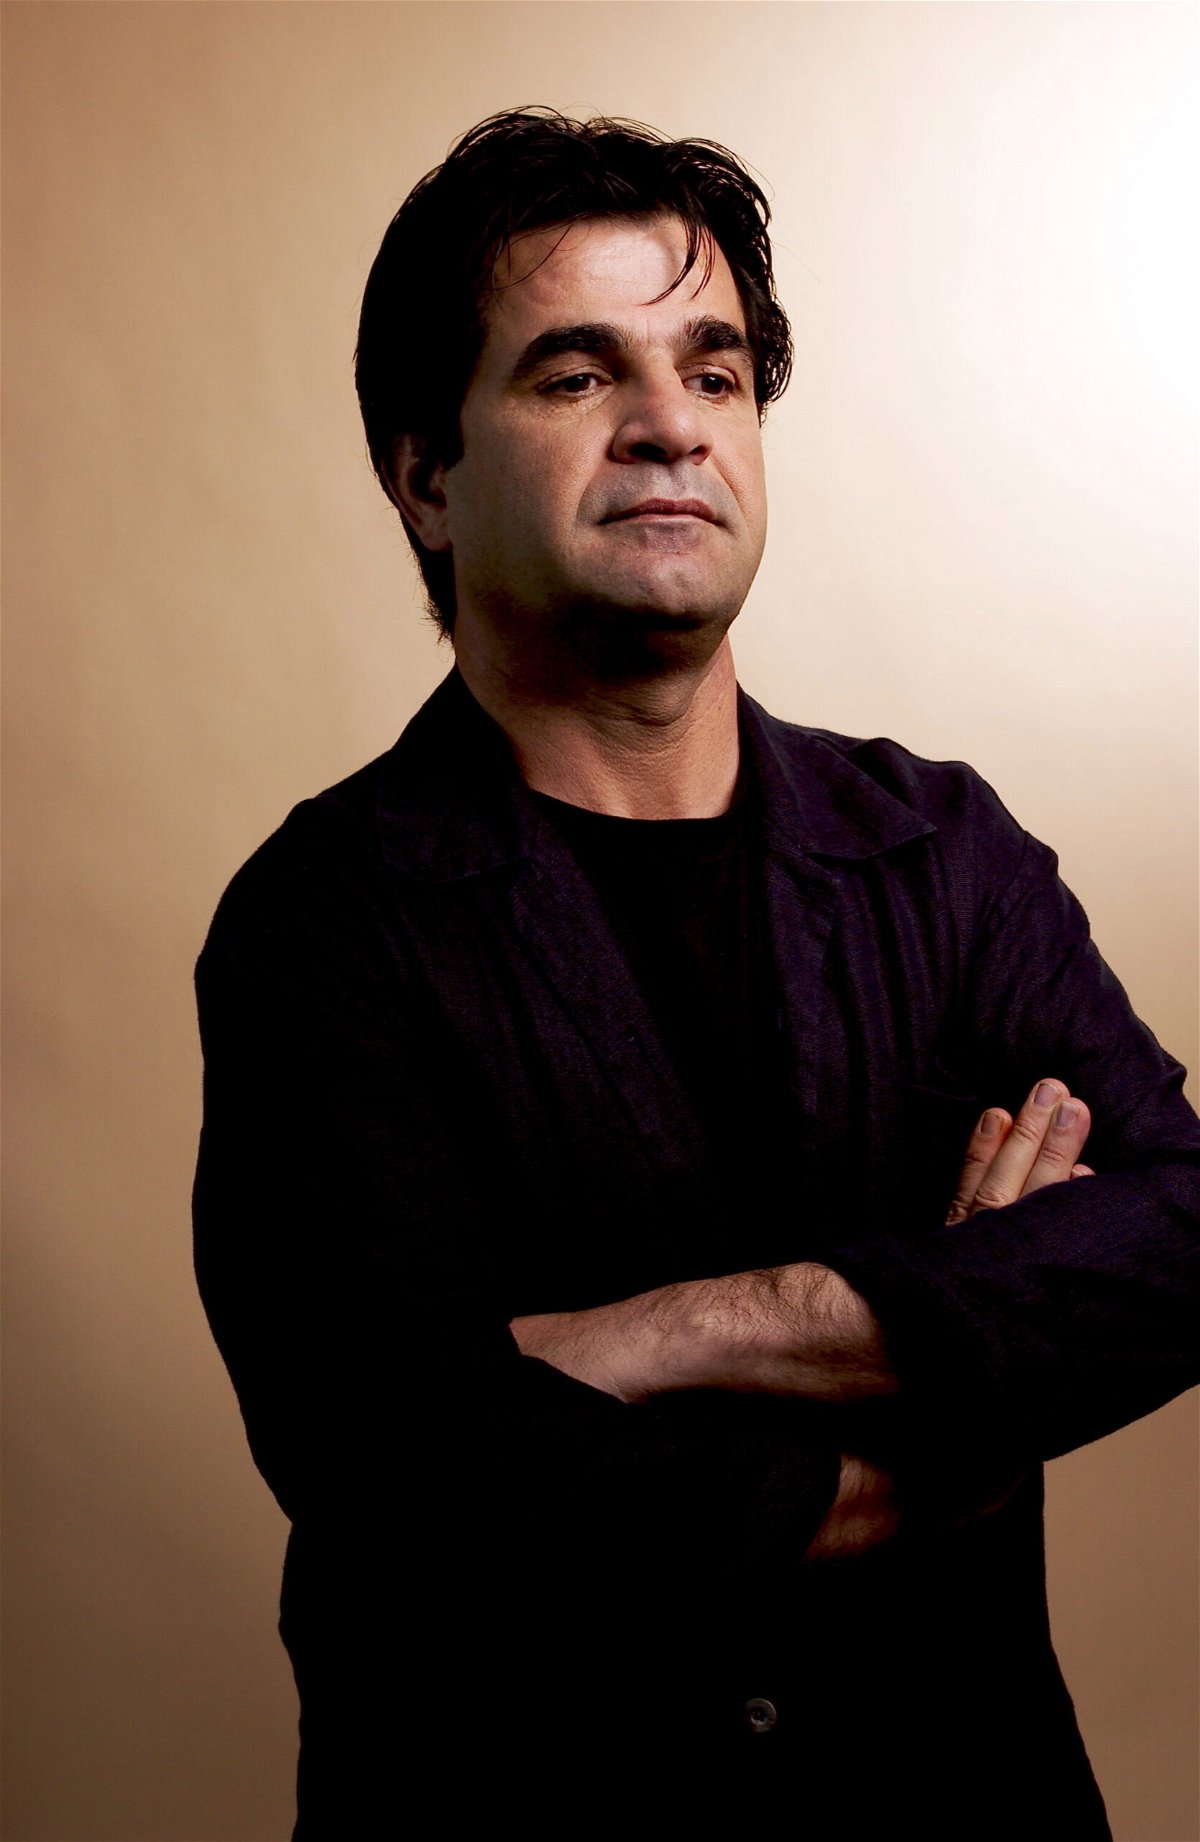 <i>Jeff Vespa/WireImage/Getty Images</i><br/>Acclaimed director Jafar Panahi has become the third Iranian filmmaker to be arrested in the country in less than a week. Panahi was arrested in Tehran as he went to check on the case of detained filmmaker Mohammad Rasoulof.